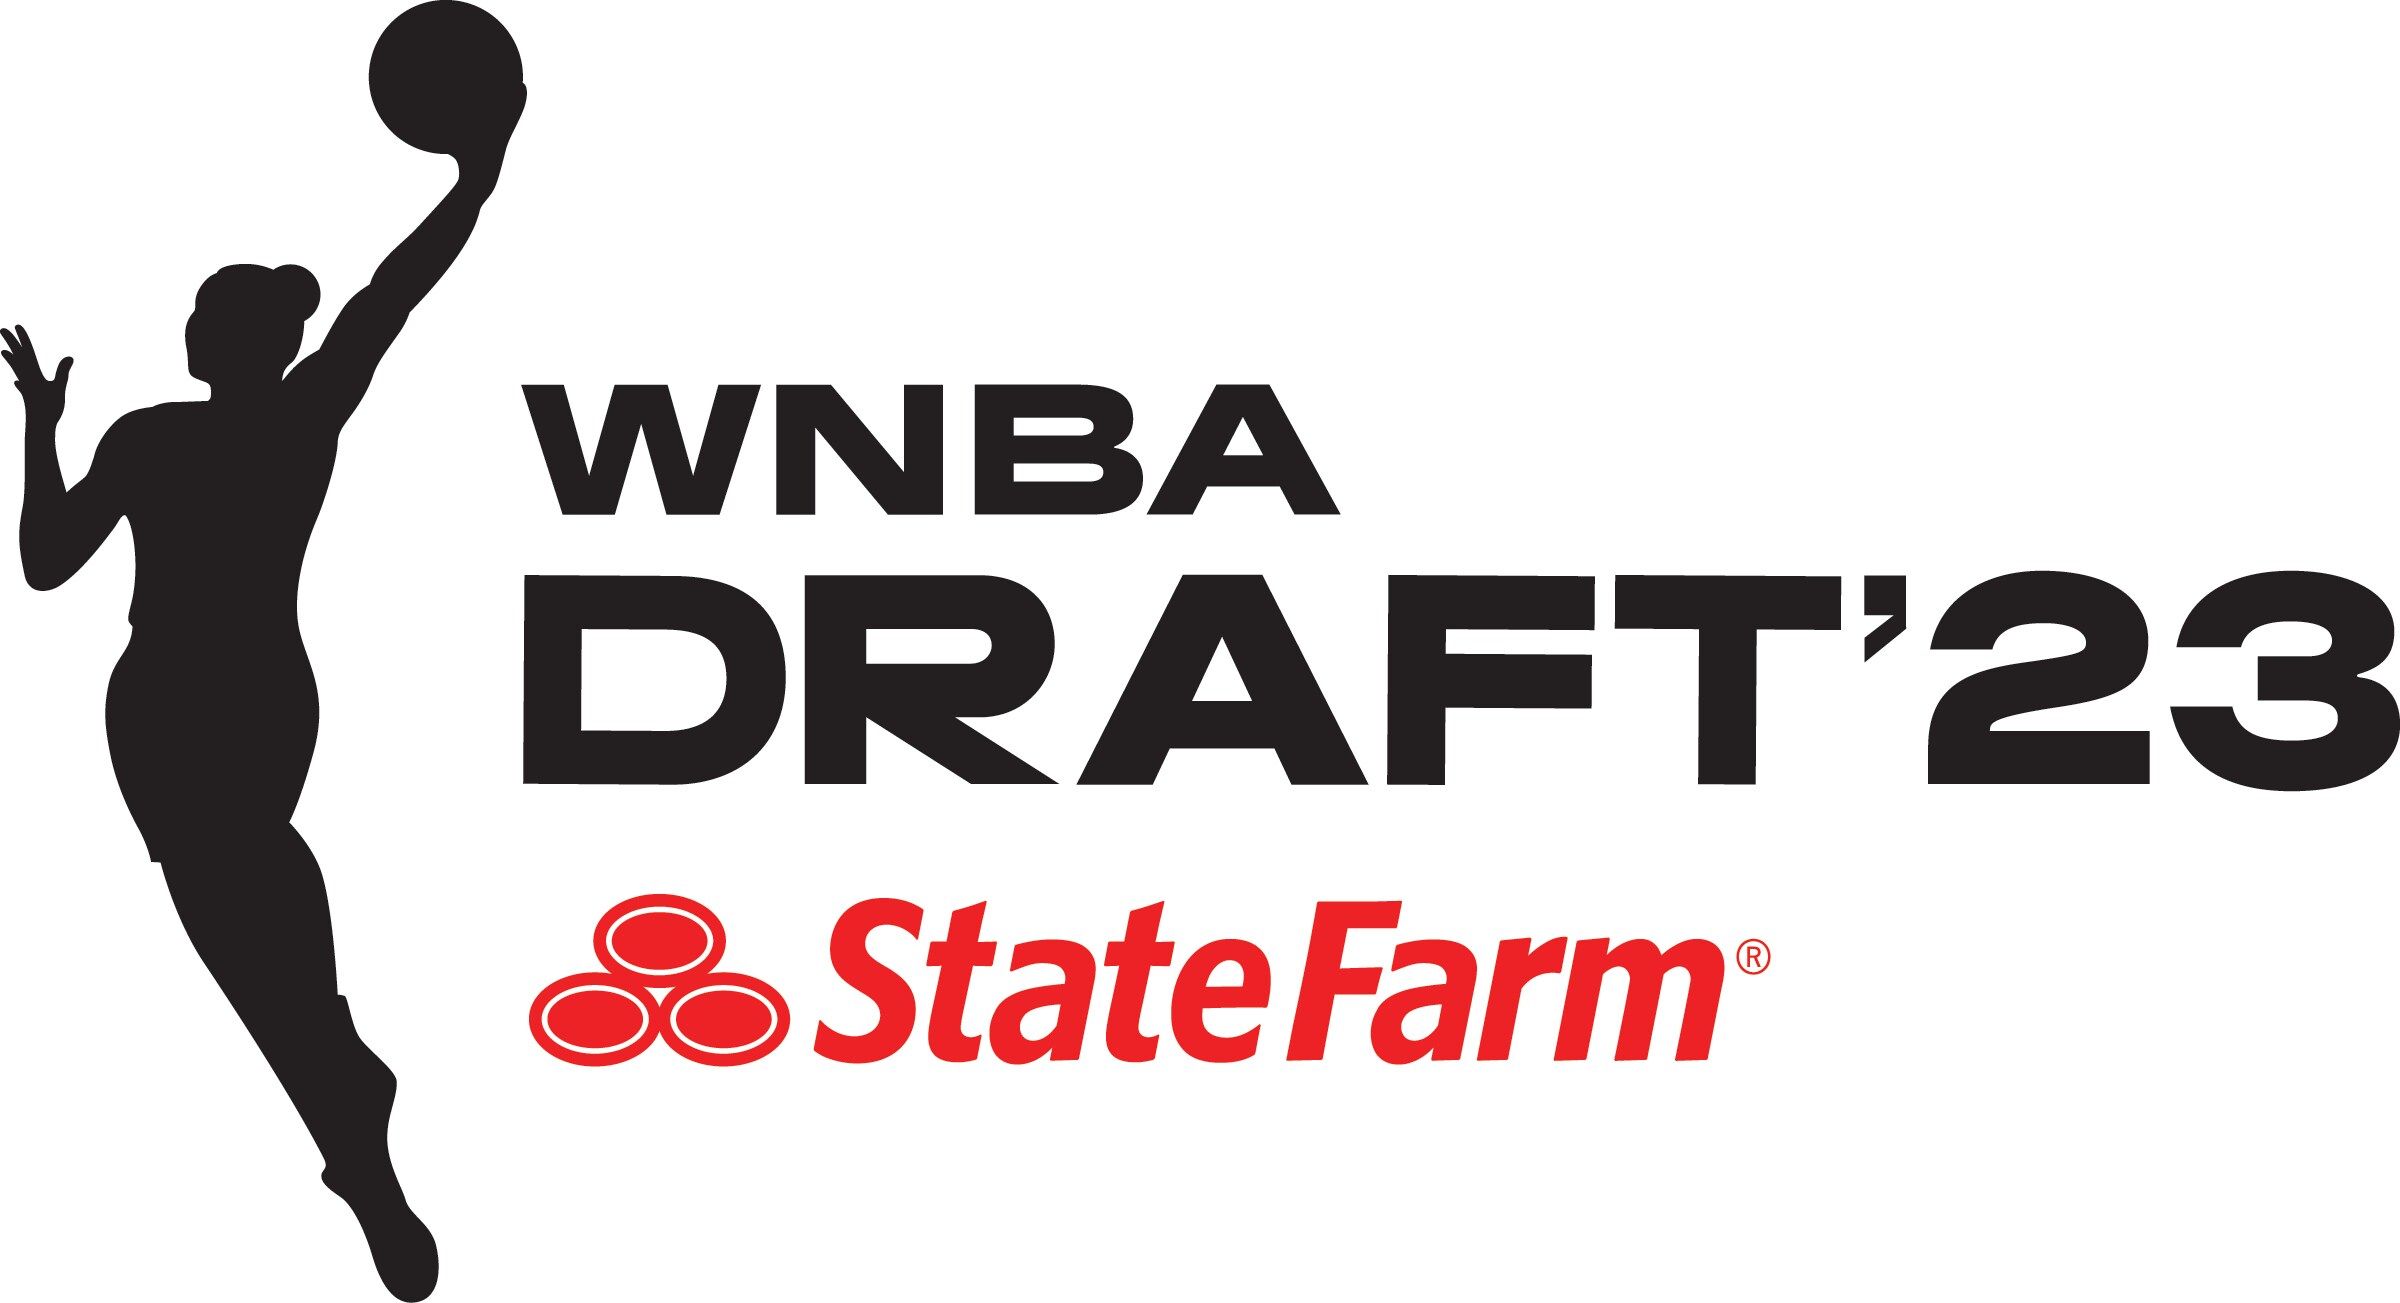 NCAA Players Who Filed For Inclusion in the 2023 WNBA Draft